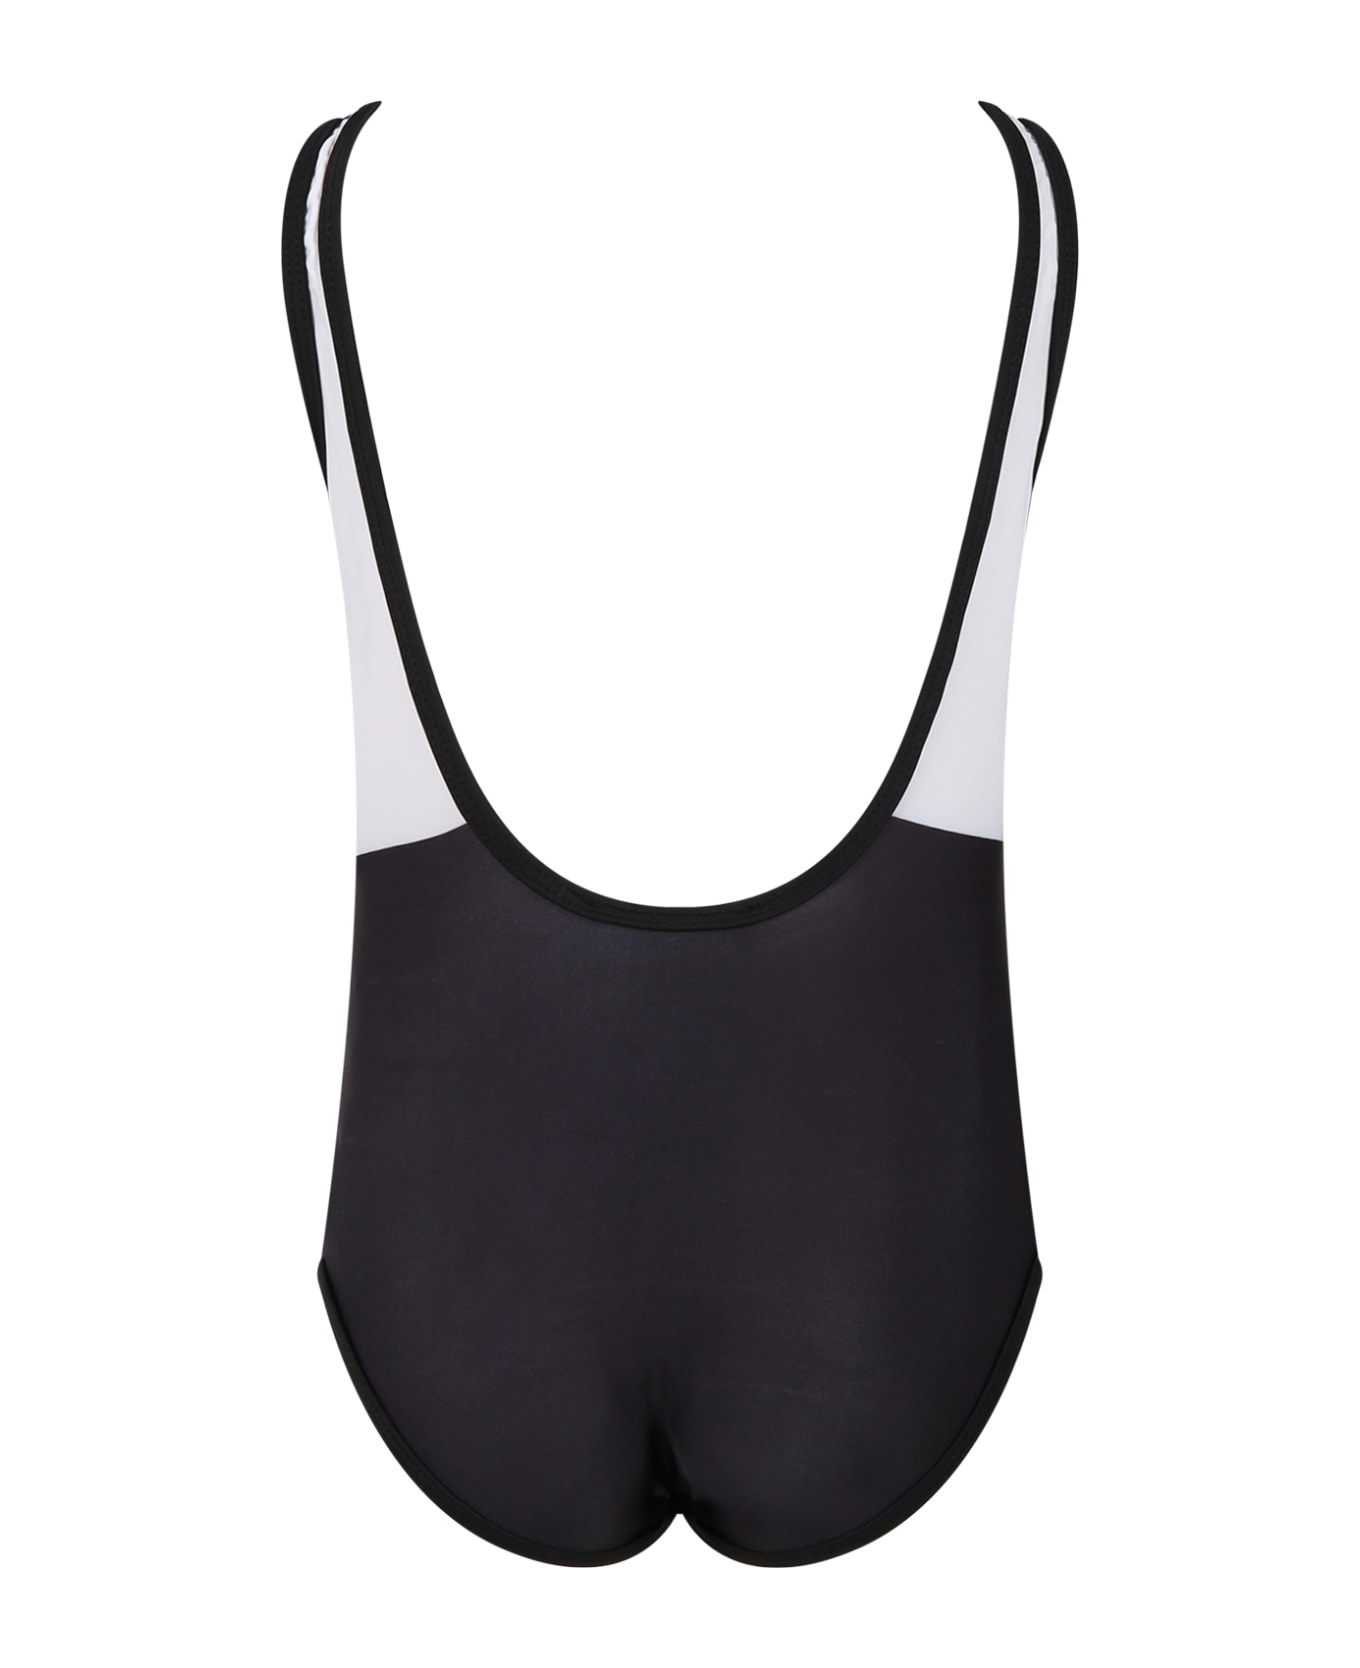 DKNY Multicolor Swimsuit For Girl With Logo - Multicolor 水着